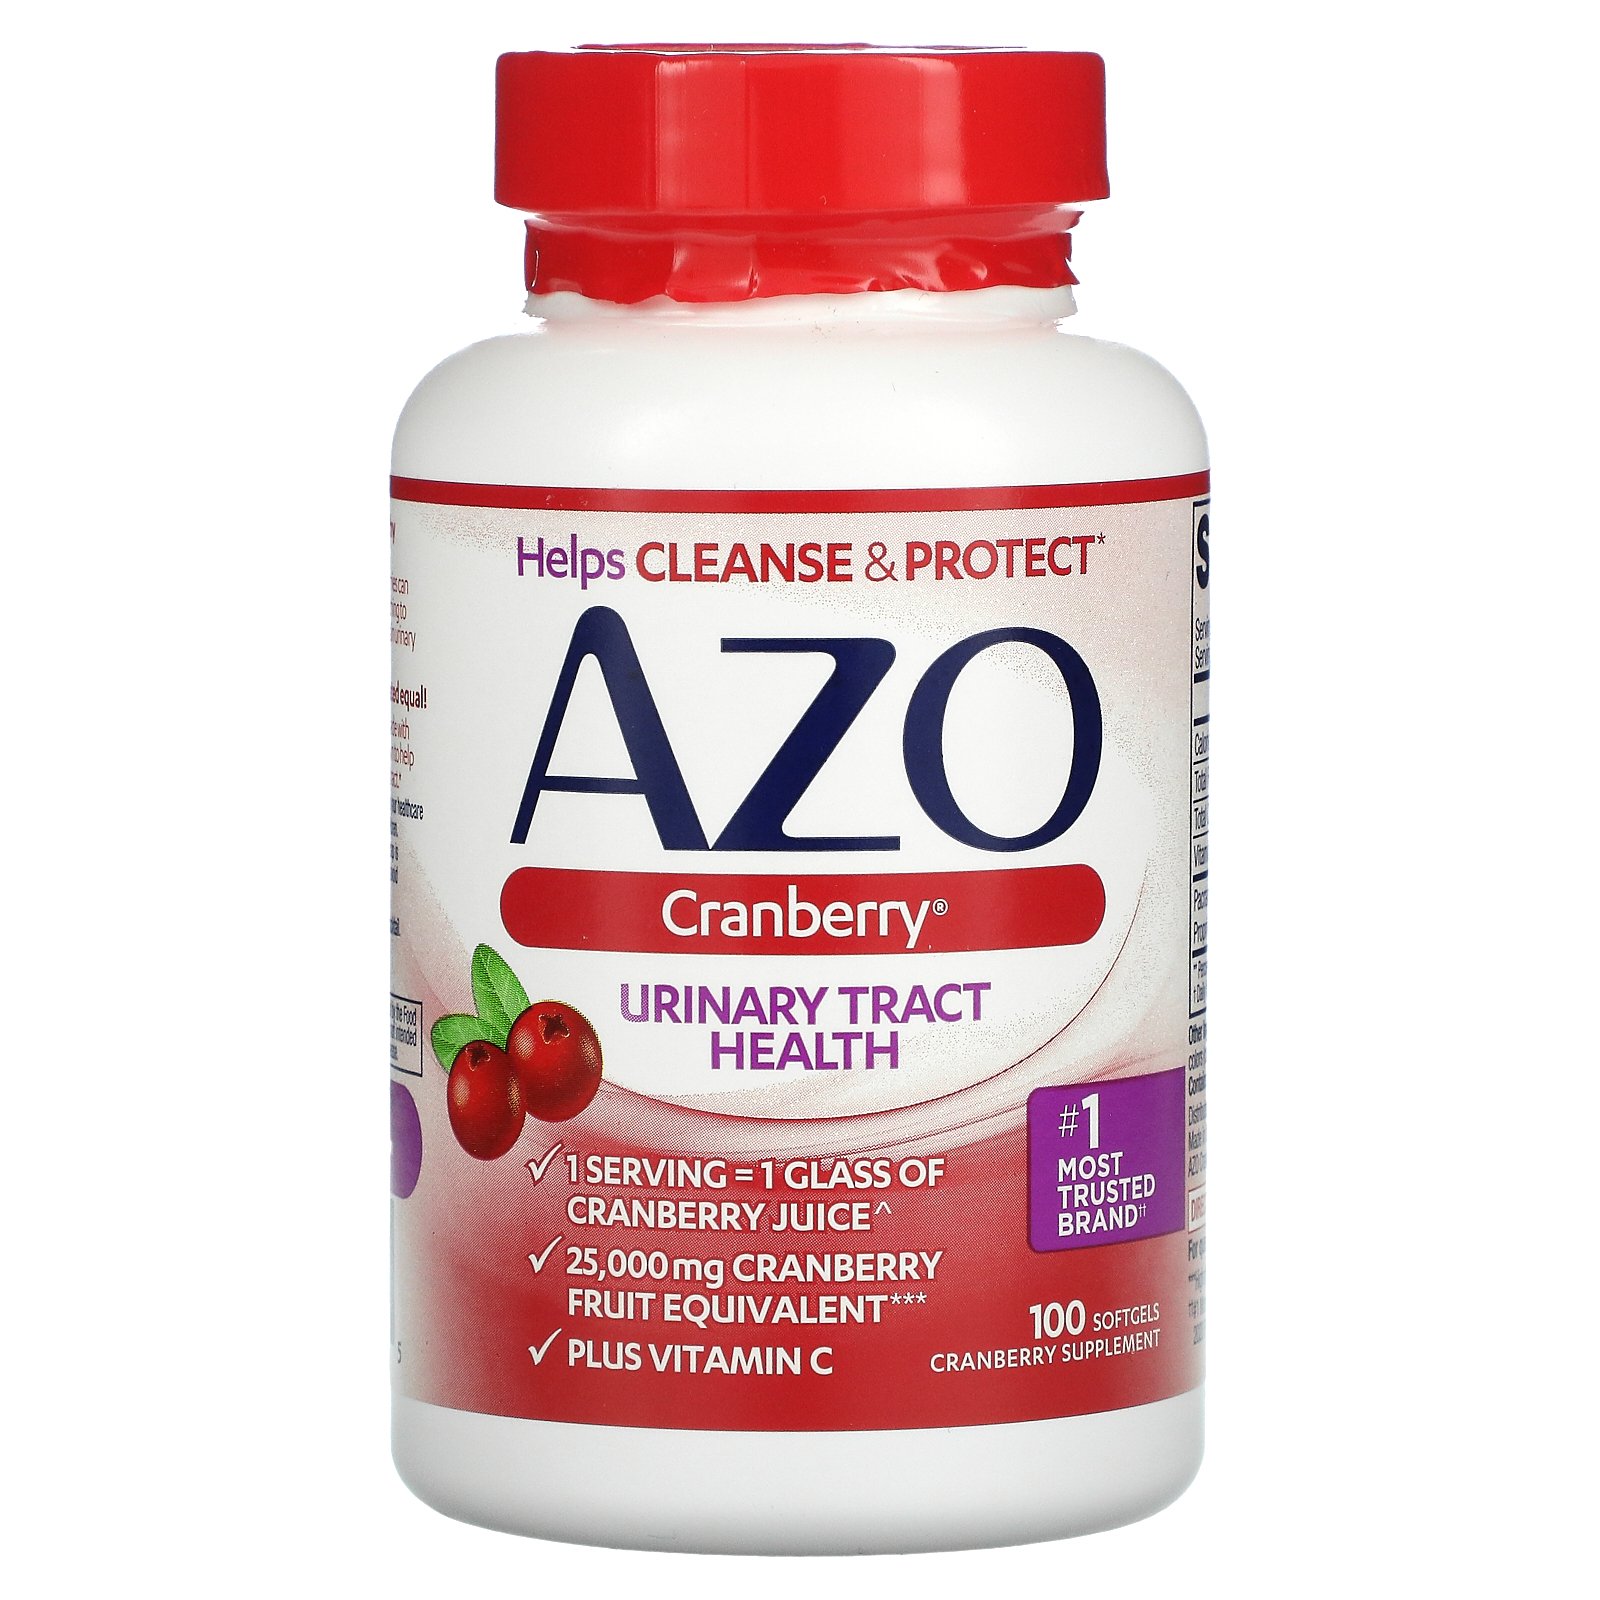 AZO Cranberry Urinary Tract Health Supplement, Sugar-Free, 100 Softgels - image 1 of 7